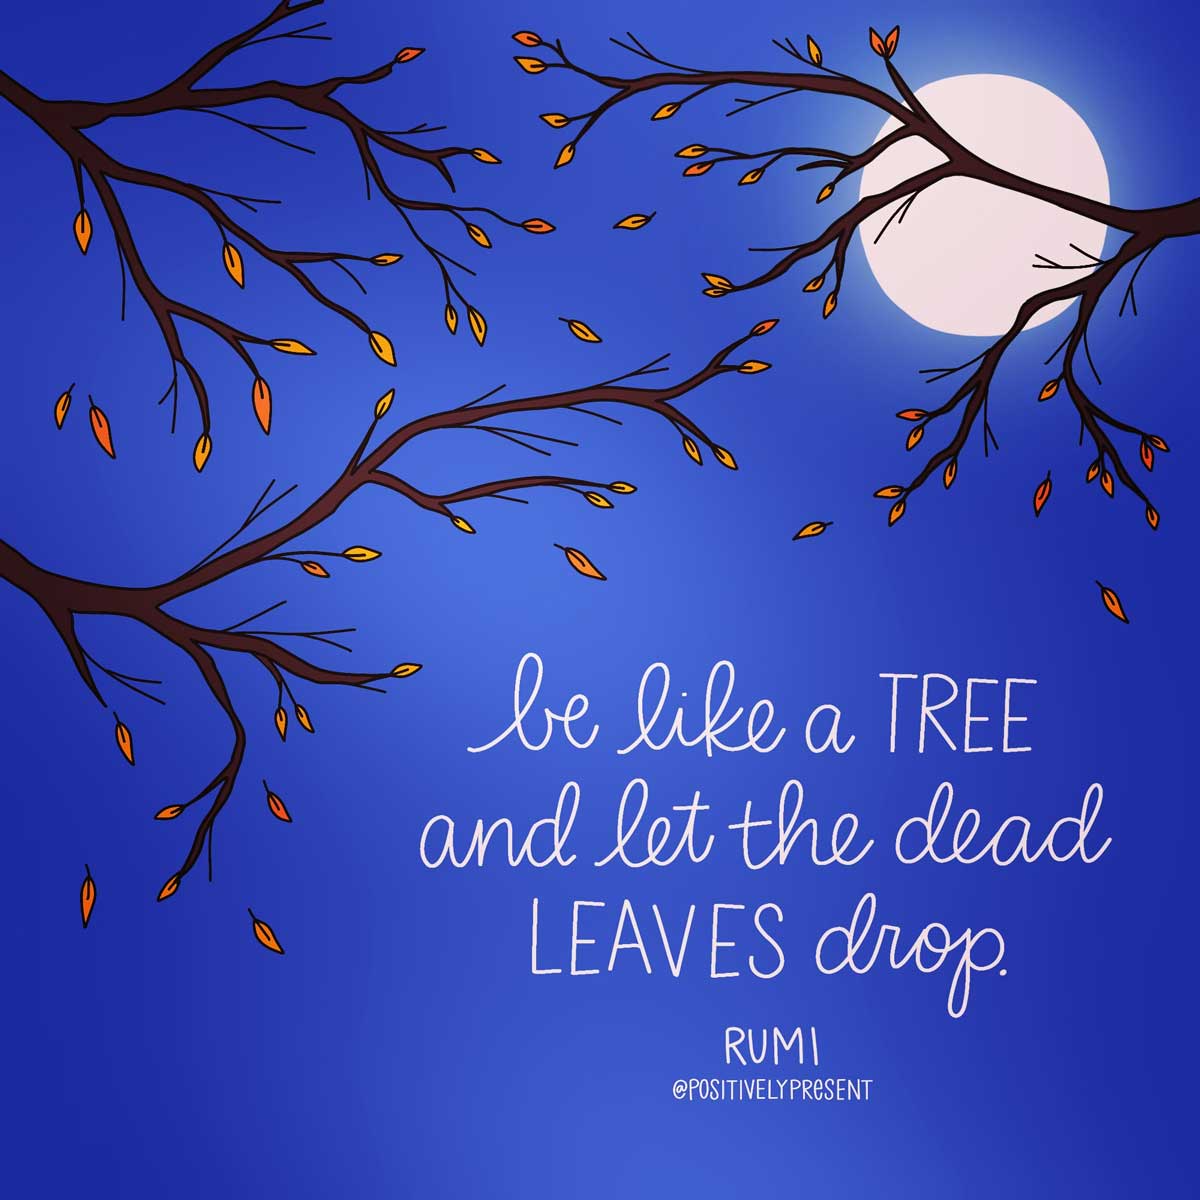 drawing of branches dropping leaves against night sky says let the dead leaves drop.